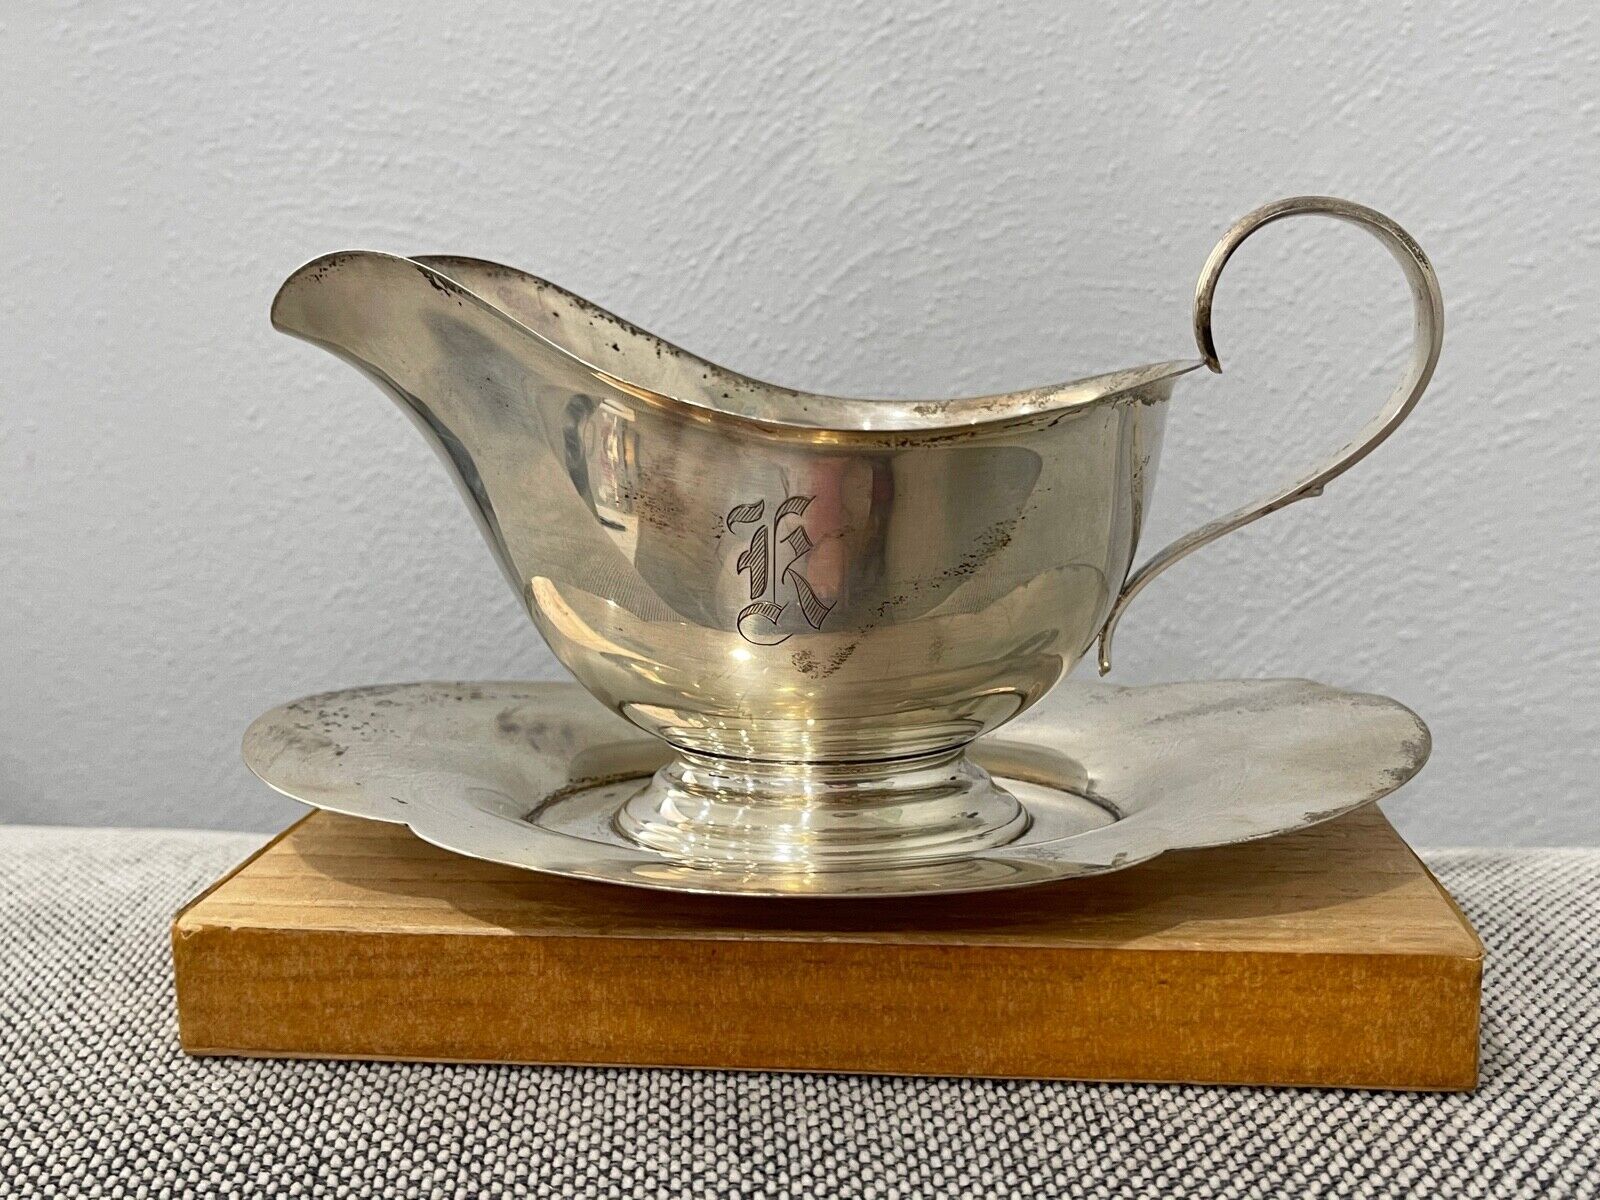 Vintage 1950's Gorham Sterling Silver Gravy Sauce Boat w/ Attached Underplate